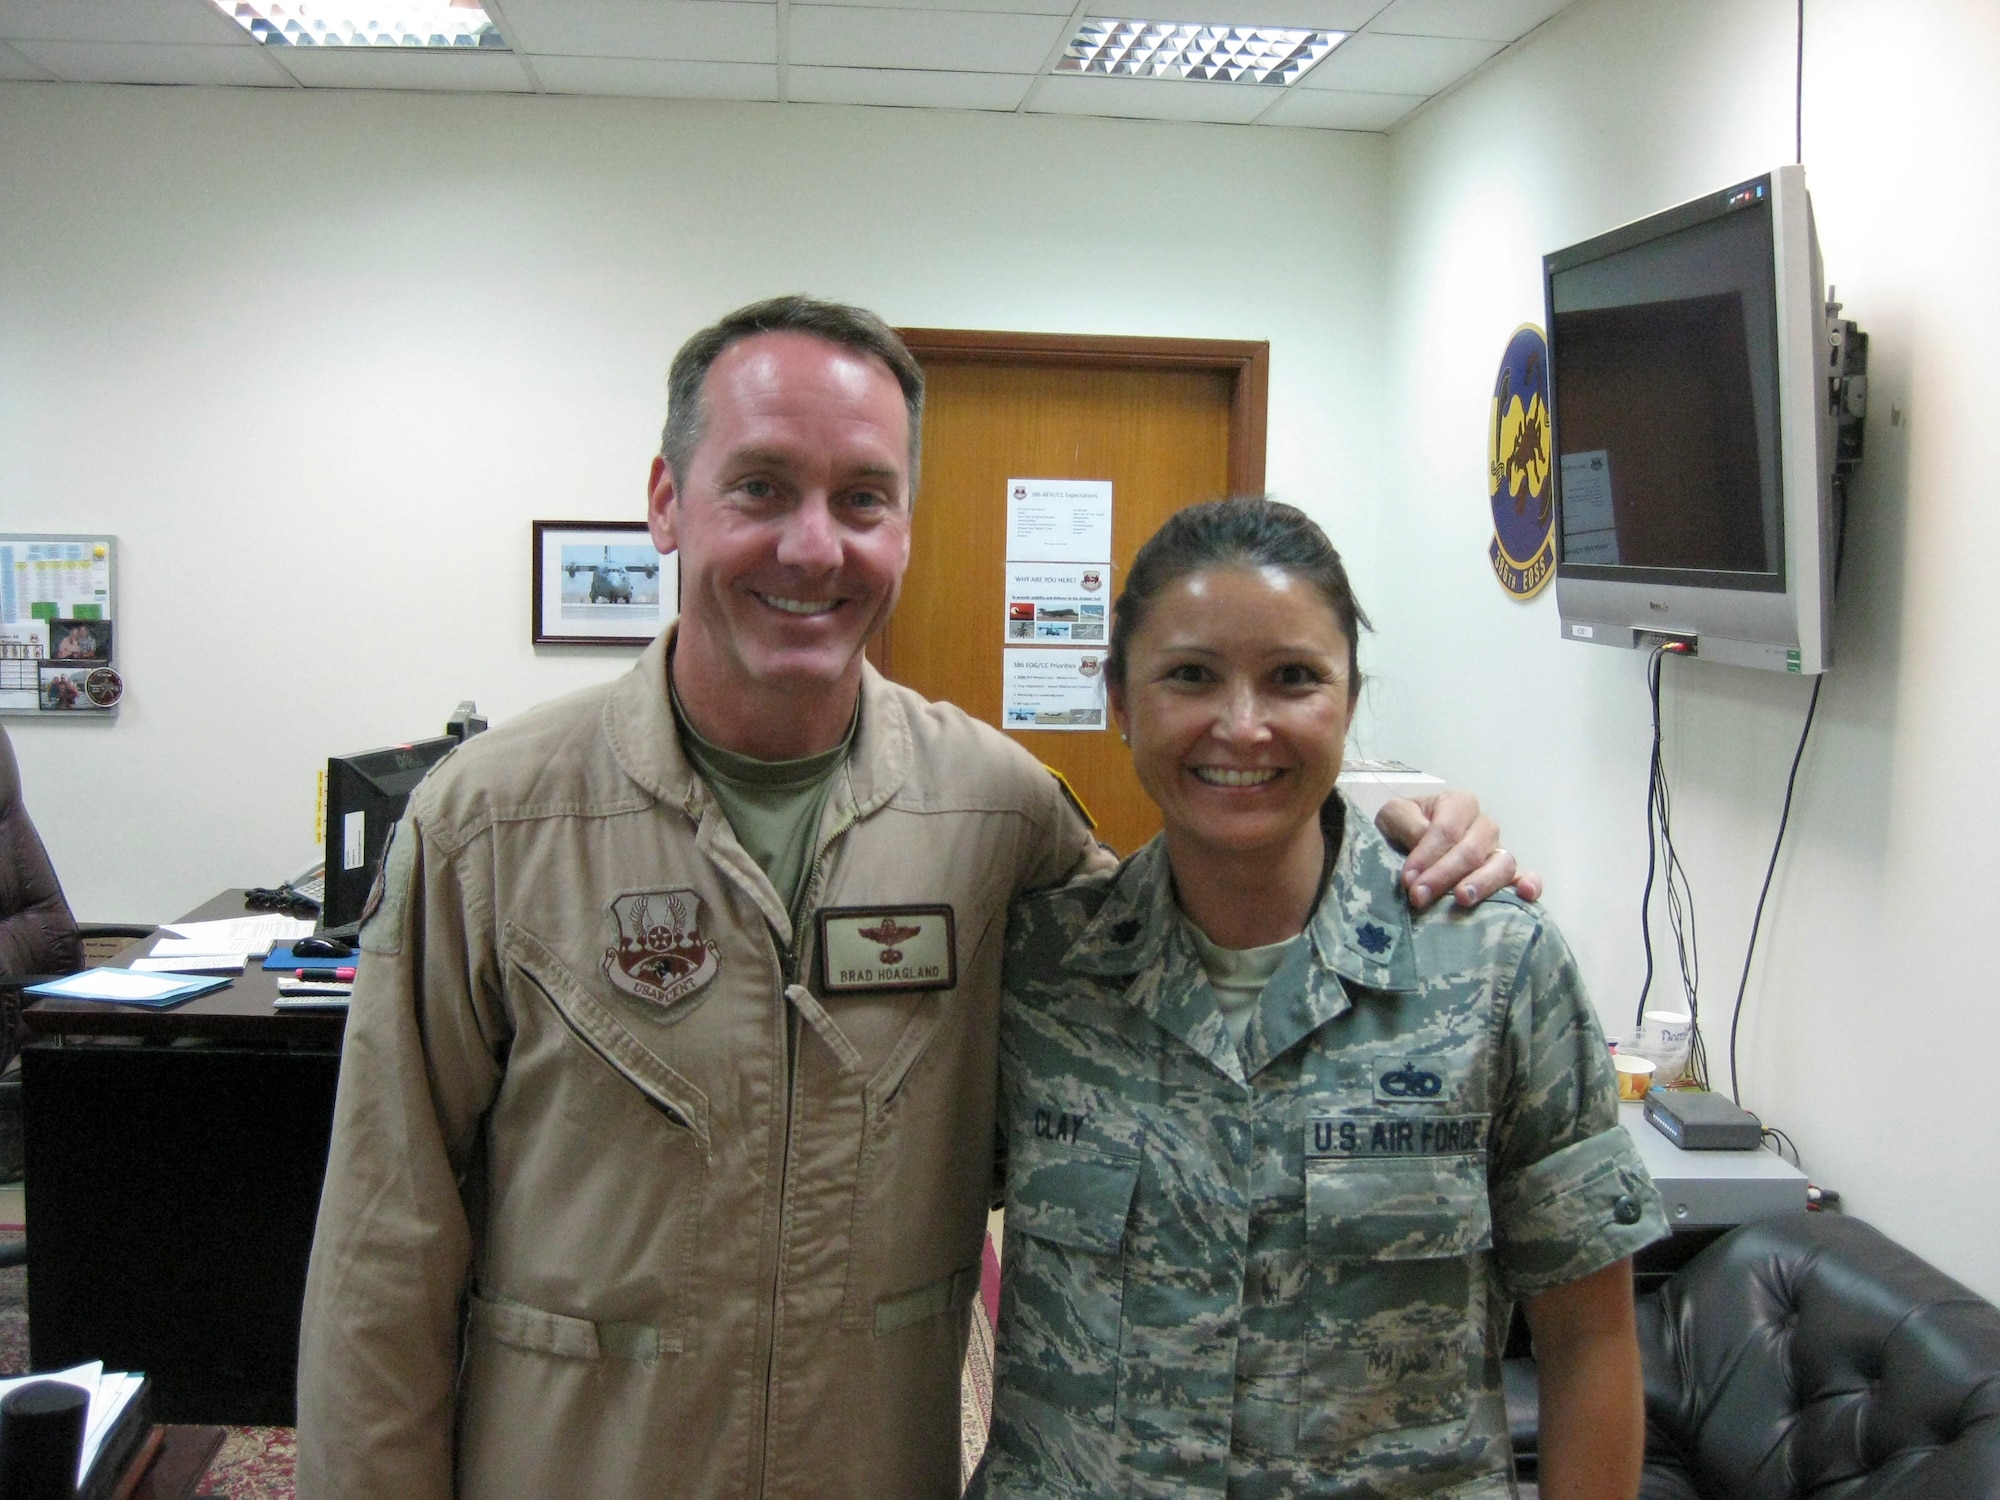 Col. Brad Hoagland and Lt. Col. Elizabeth Clay pose for a photo at the 386th Air Expeditionary Wing, Southwest Asia. Both Clay and Hoagland are from the same hometown in Elyria, Ohio and are currently serving together at the 386th AEW. (courtesy photo)